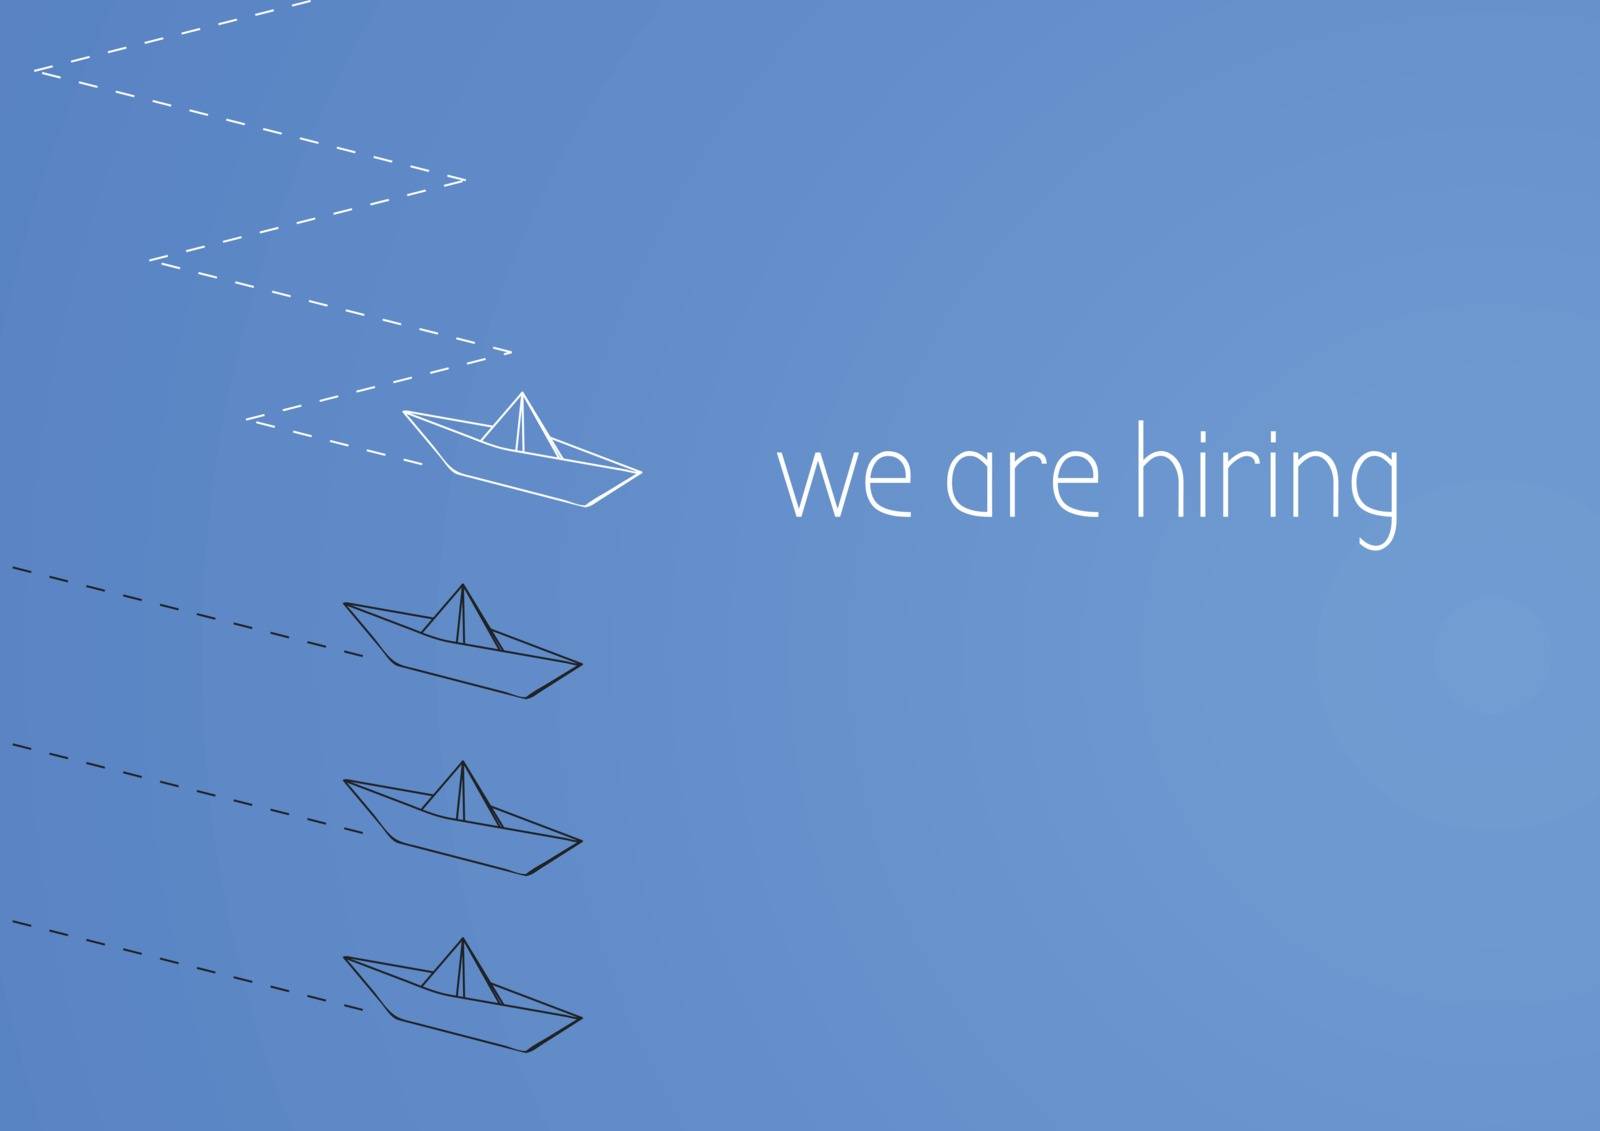 We are hiring concept illustration with a folded paper boat.